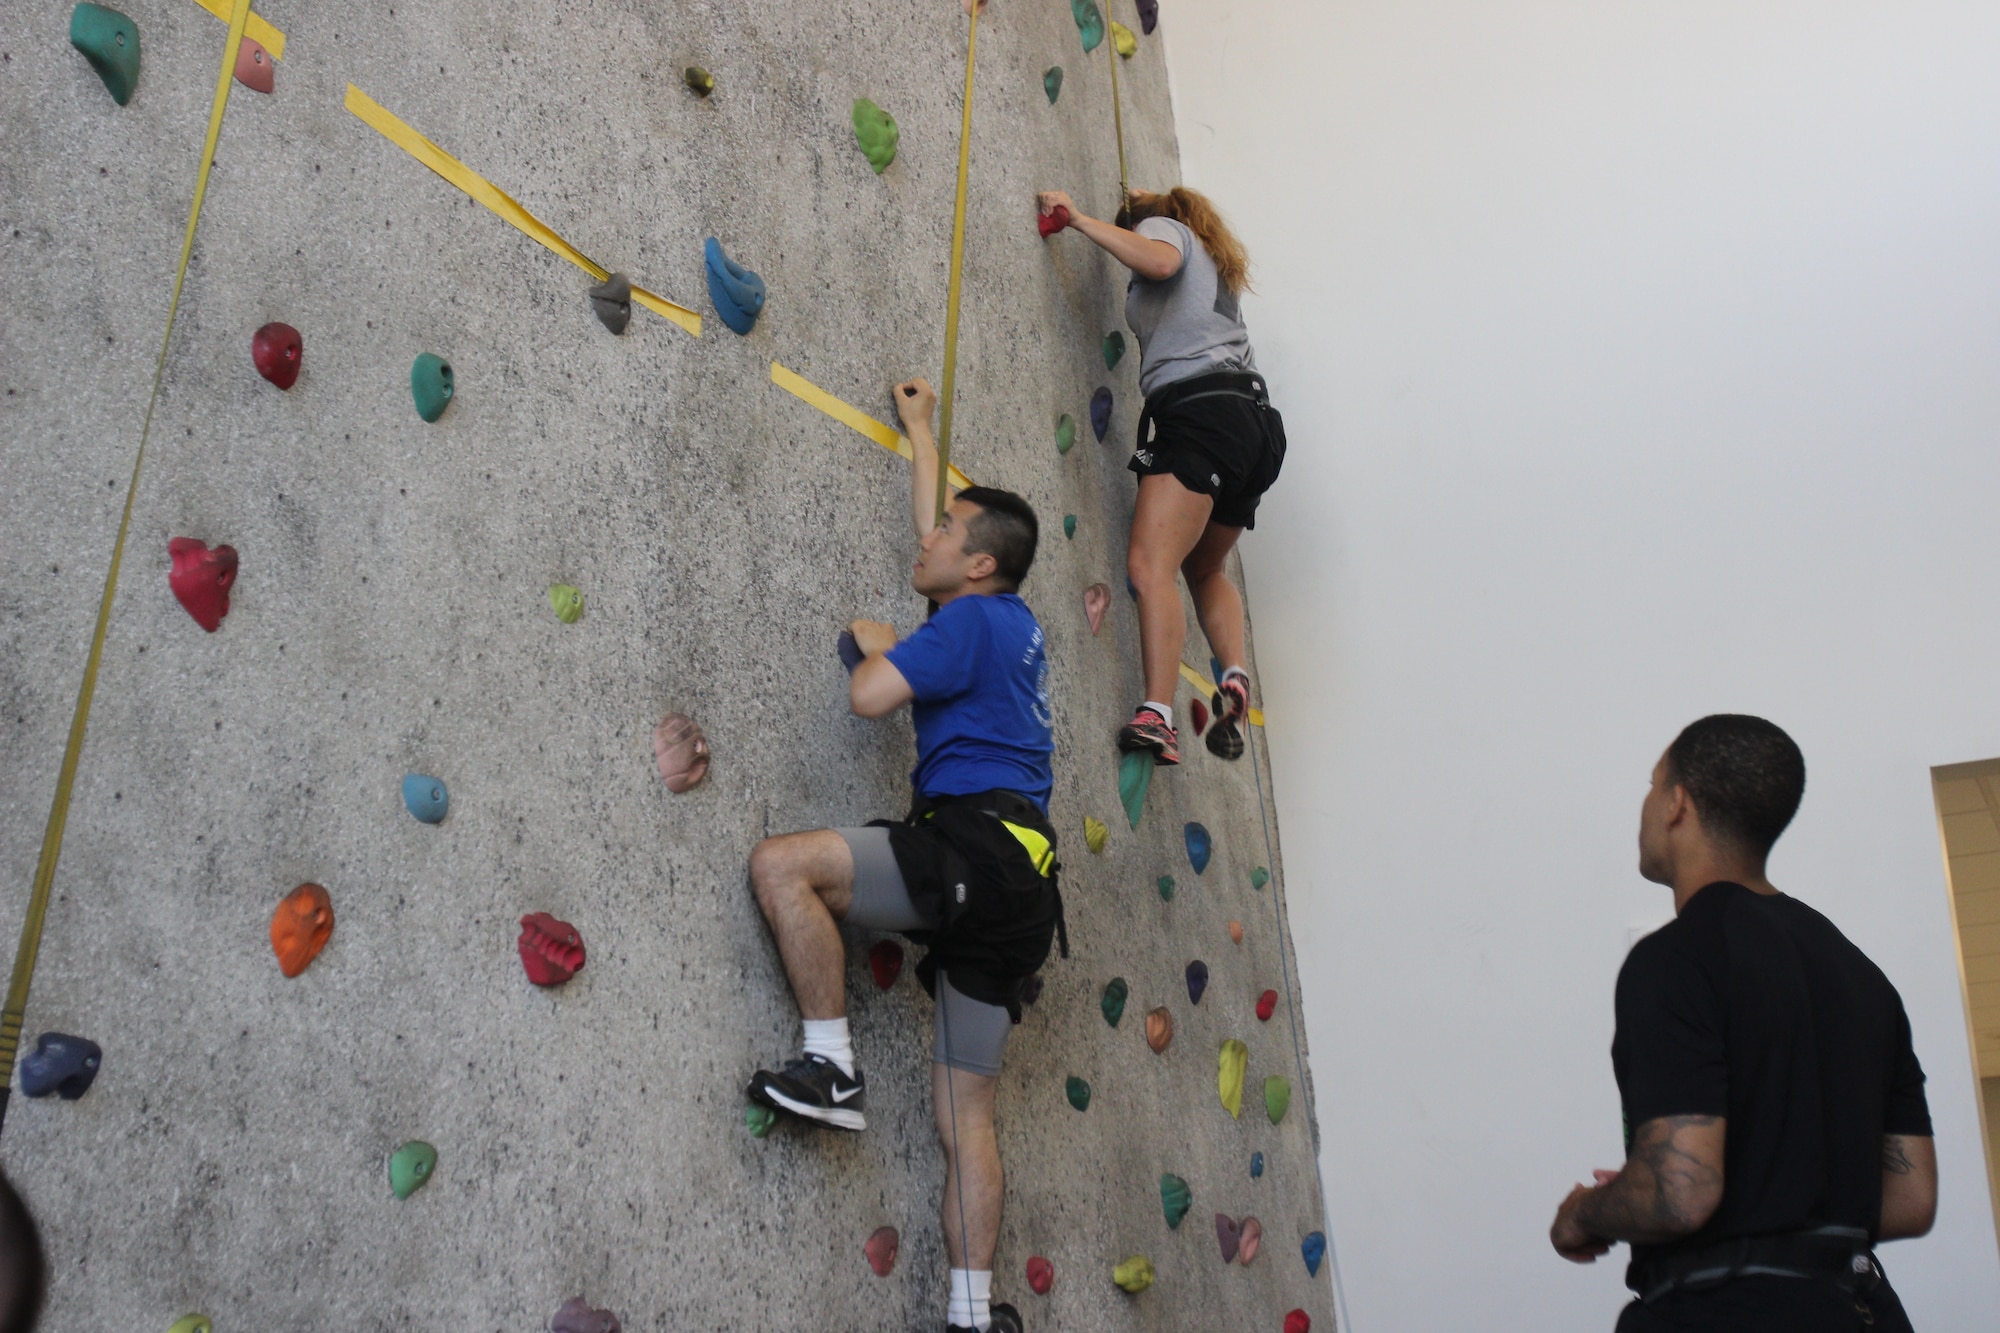 Wright-Patt Outdoor Recreation offers indoor programs during the winter months. Airmen eligible under the Recharge for Resiliency program can participate in the activities at discounted rates. Indoor rock climbing is one of the programs available for the month of November.